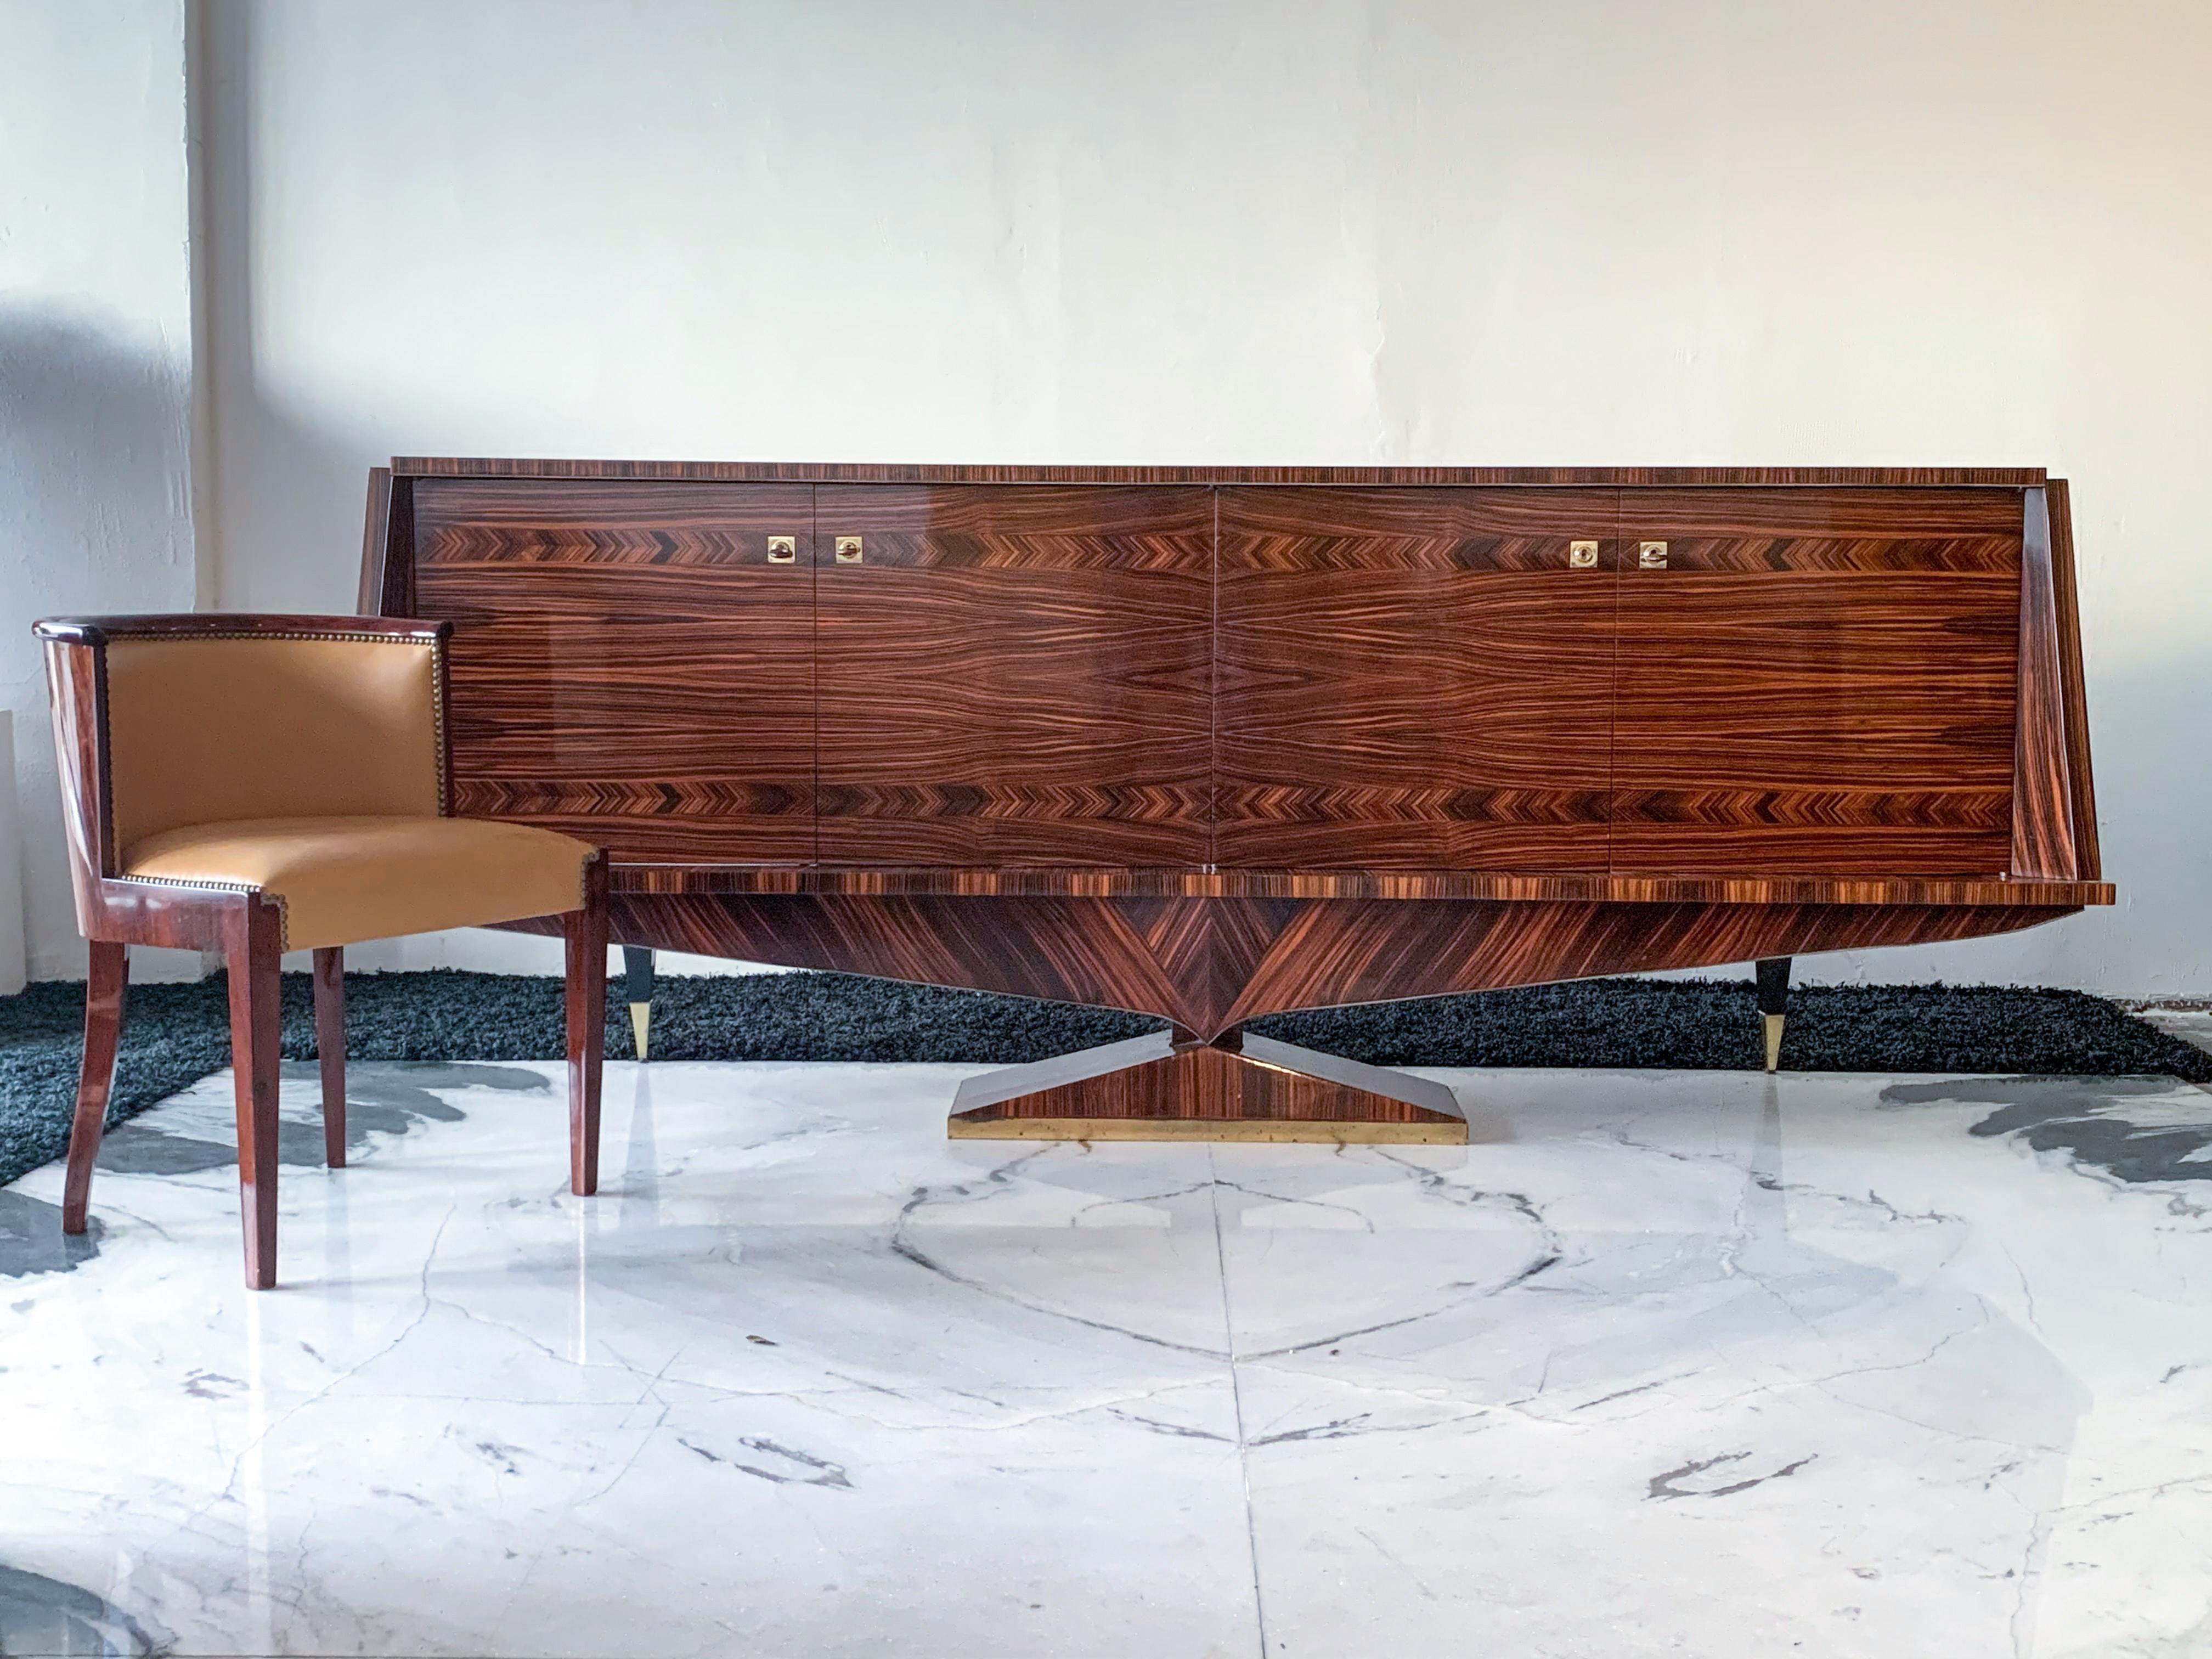 This credenza is an absolute showstopper! It's equal parts Mid-Century Modern and Art Deco refined into an elegantly shaped, oversized credenza. This credenza is completely clad in rare Macassar ebony wood -- similar to rosewood.

The credenza